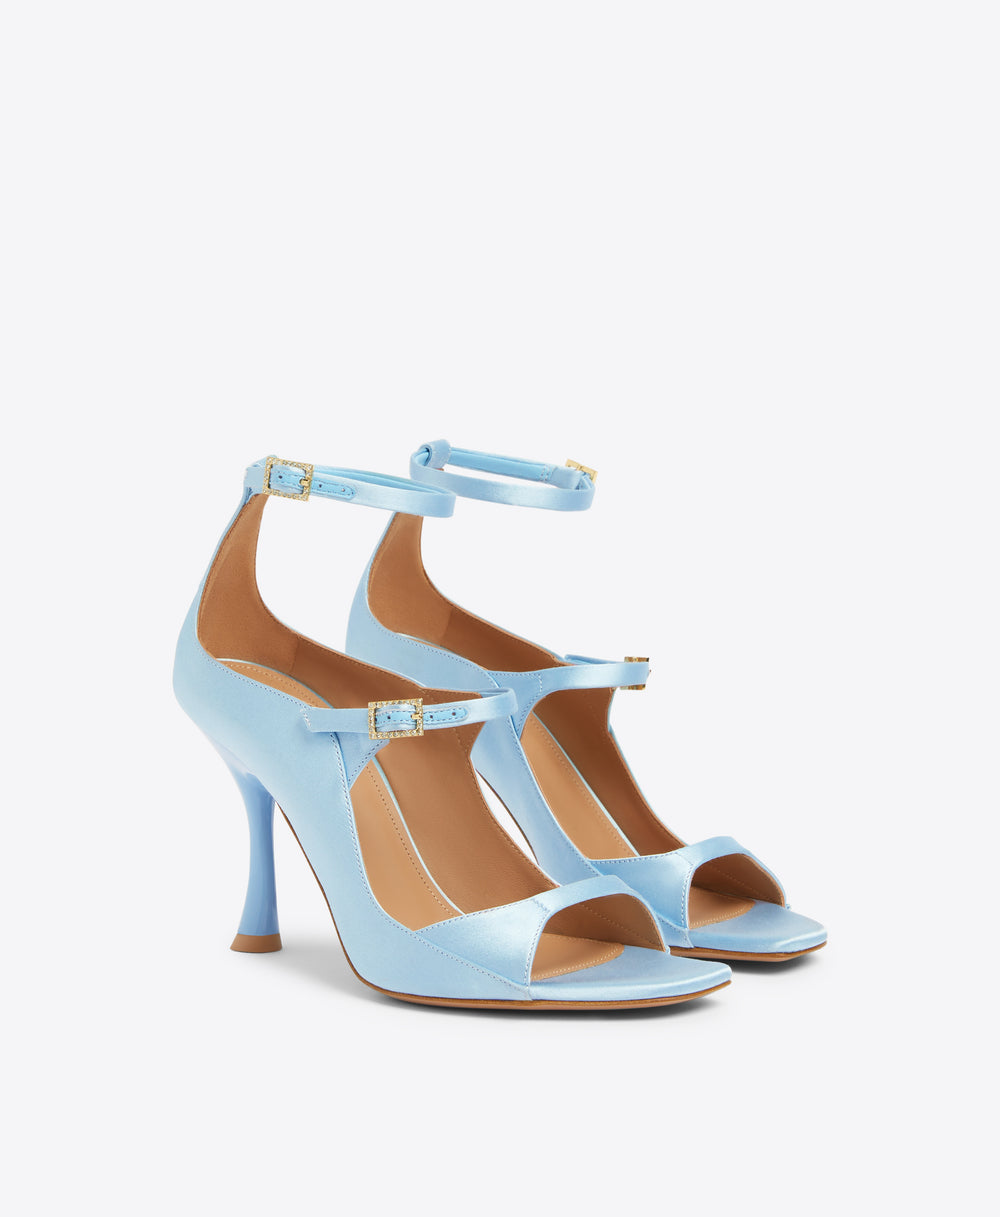 Riley 90 Baby Blue Satin Heeled Sandals Malone Souliers